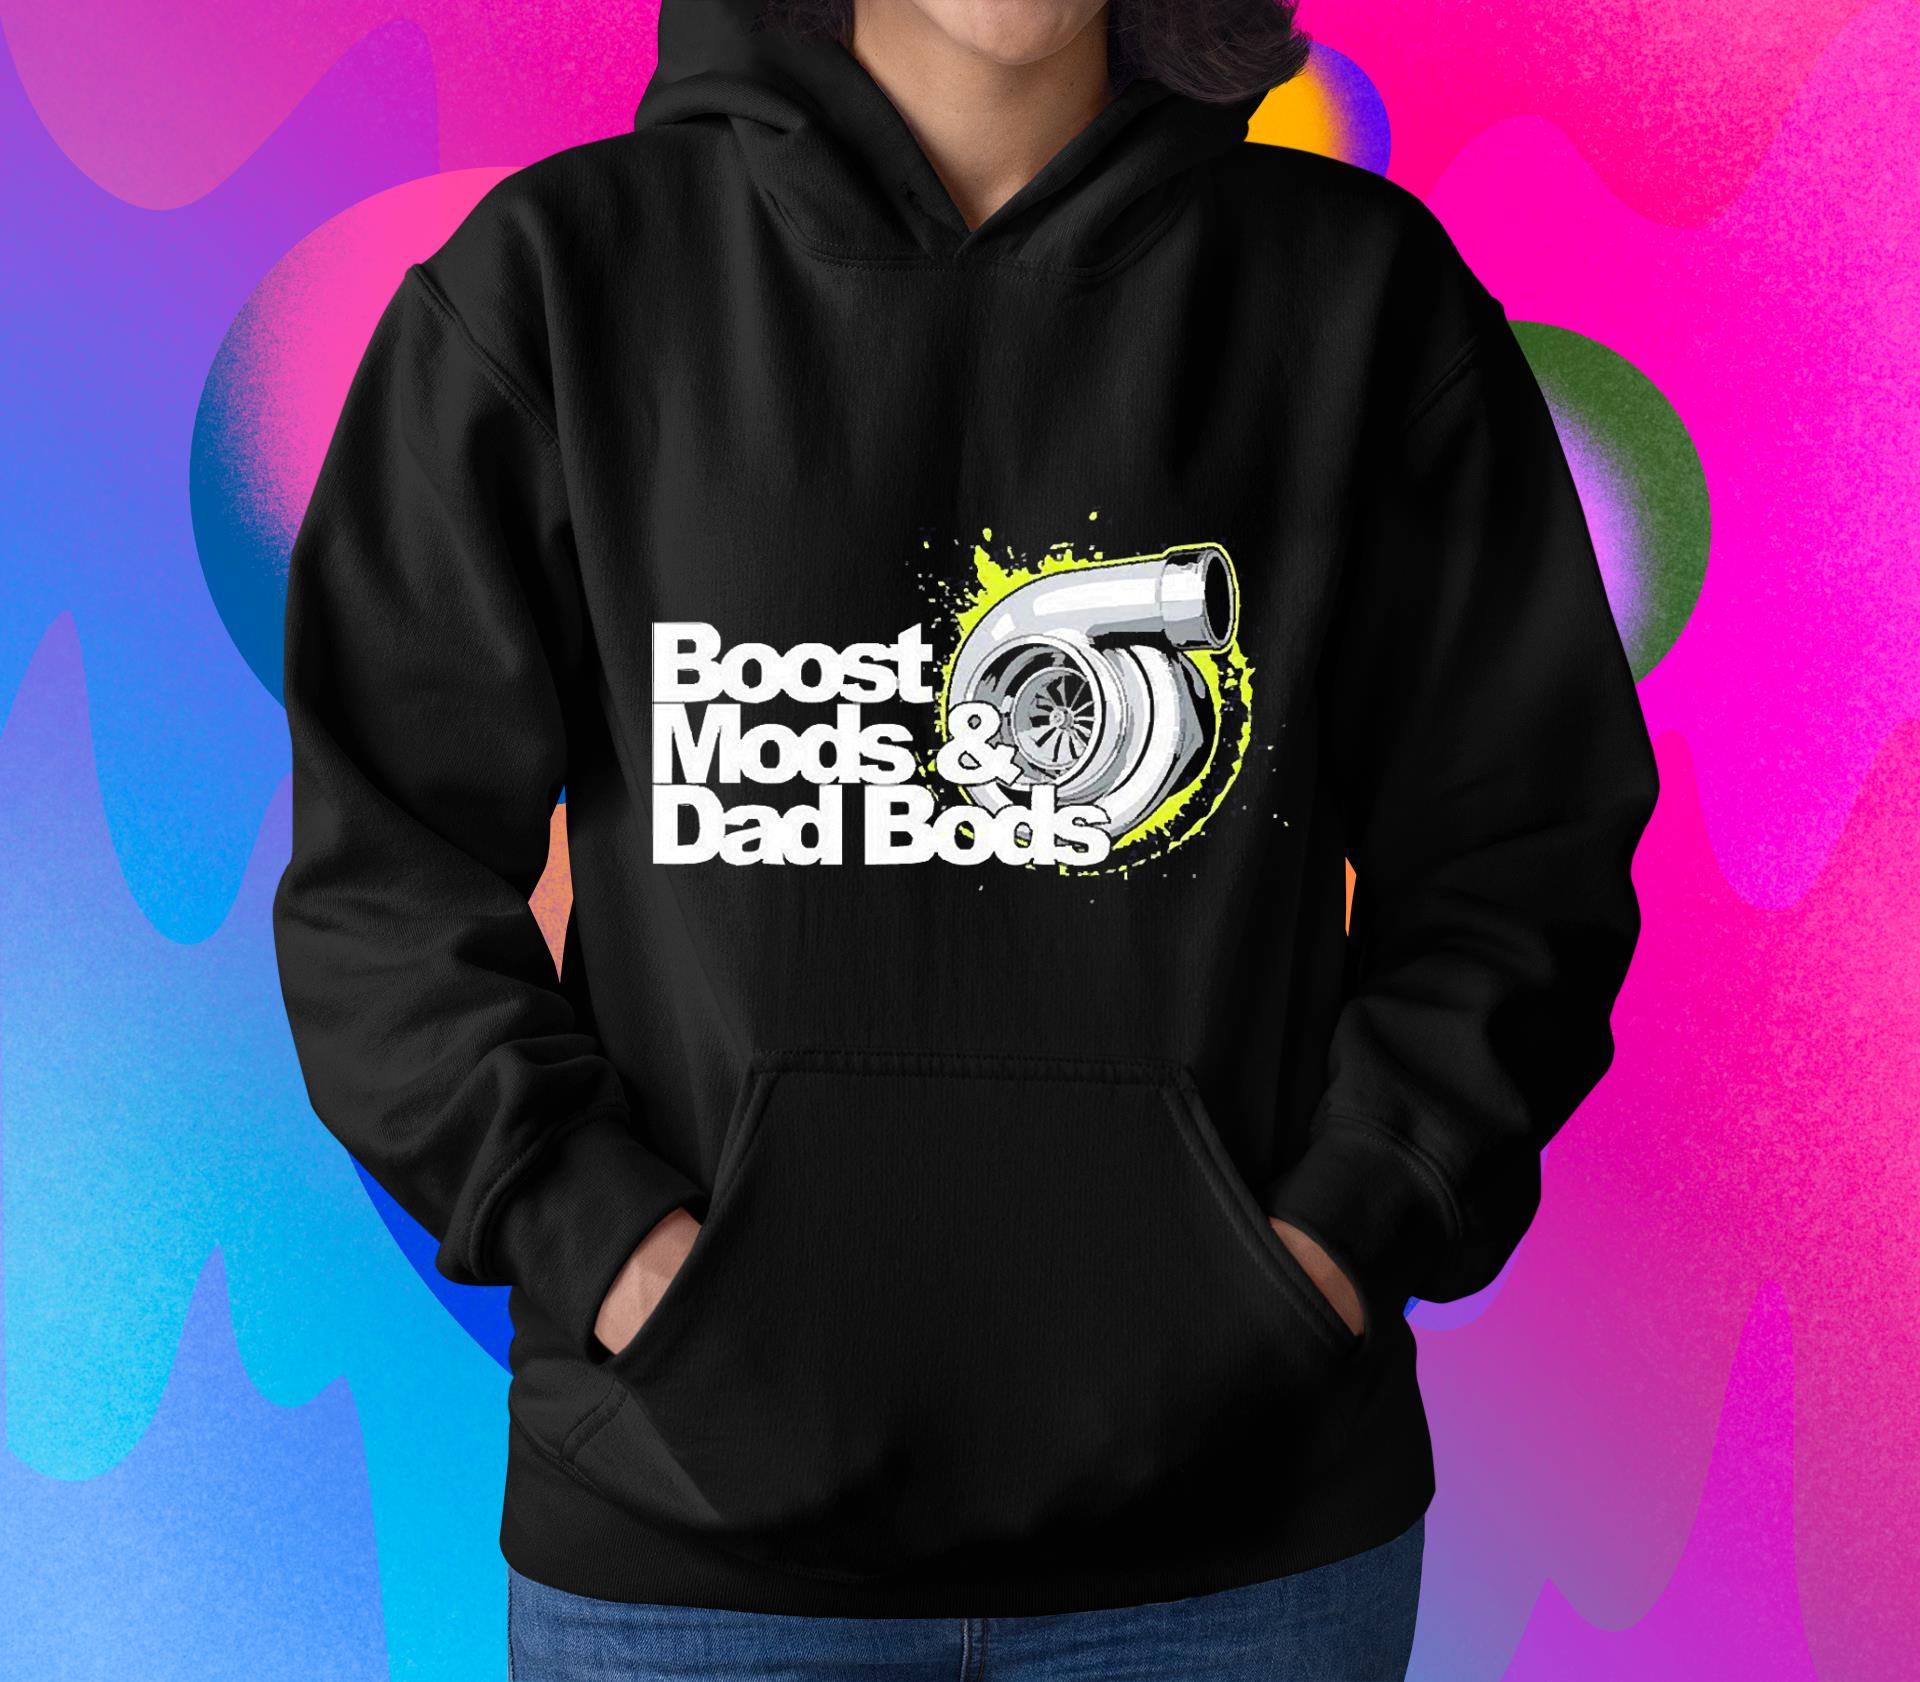 Boost Mods and Dad Bods shirt